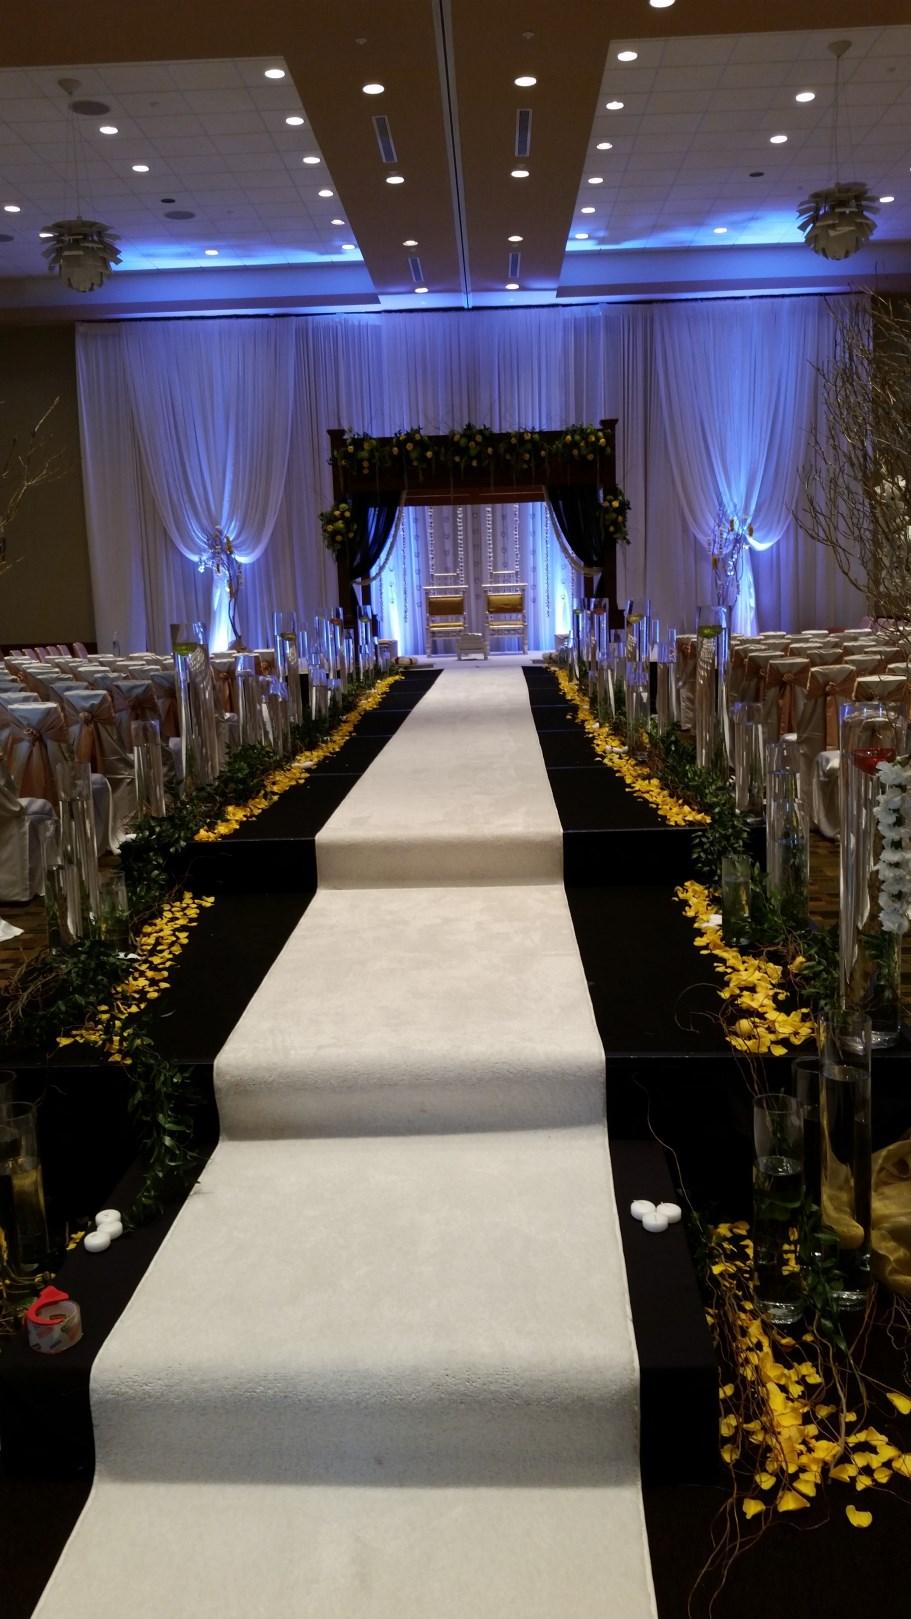 banquet chairs Riser provided by hotel for Mandap Microphone provided for Ceremony